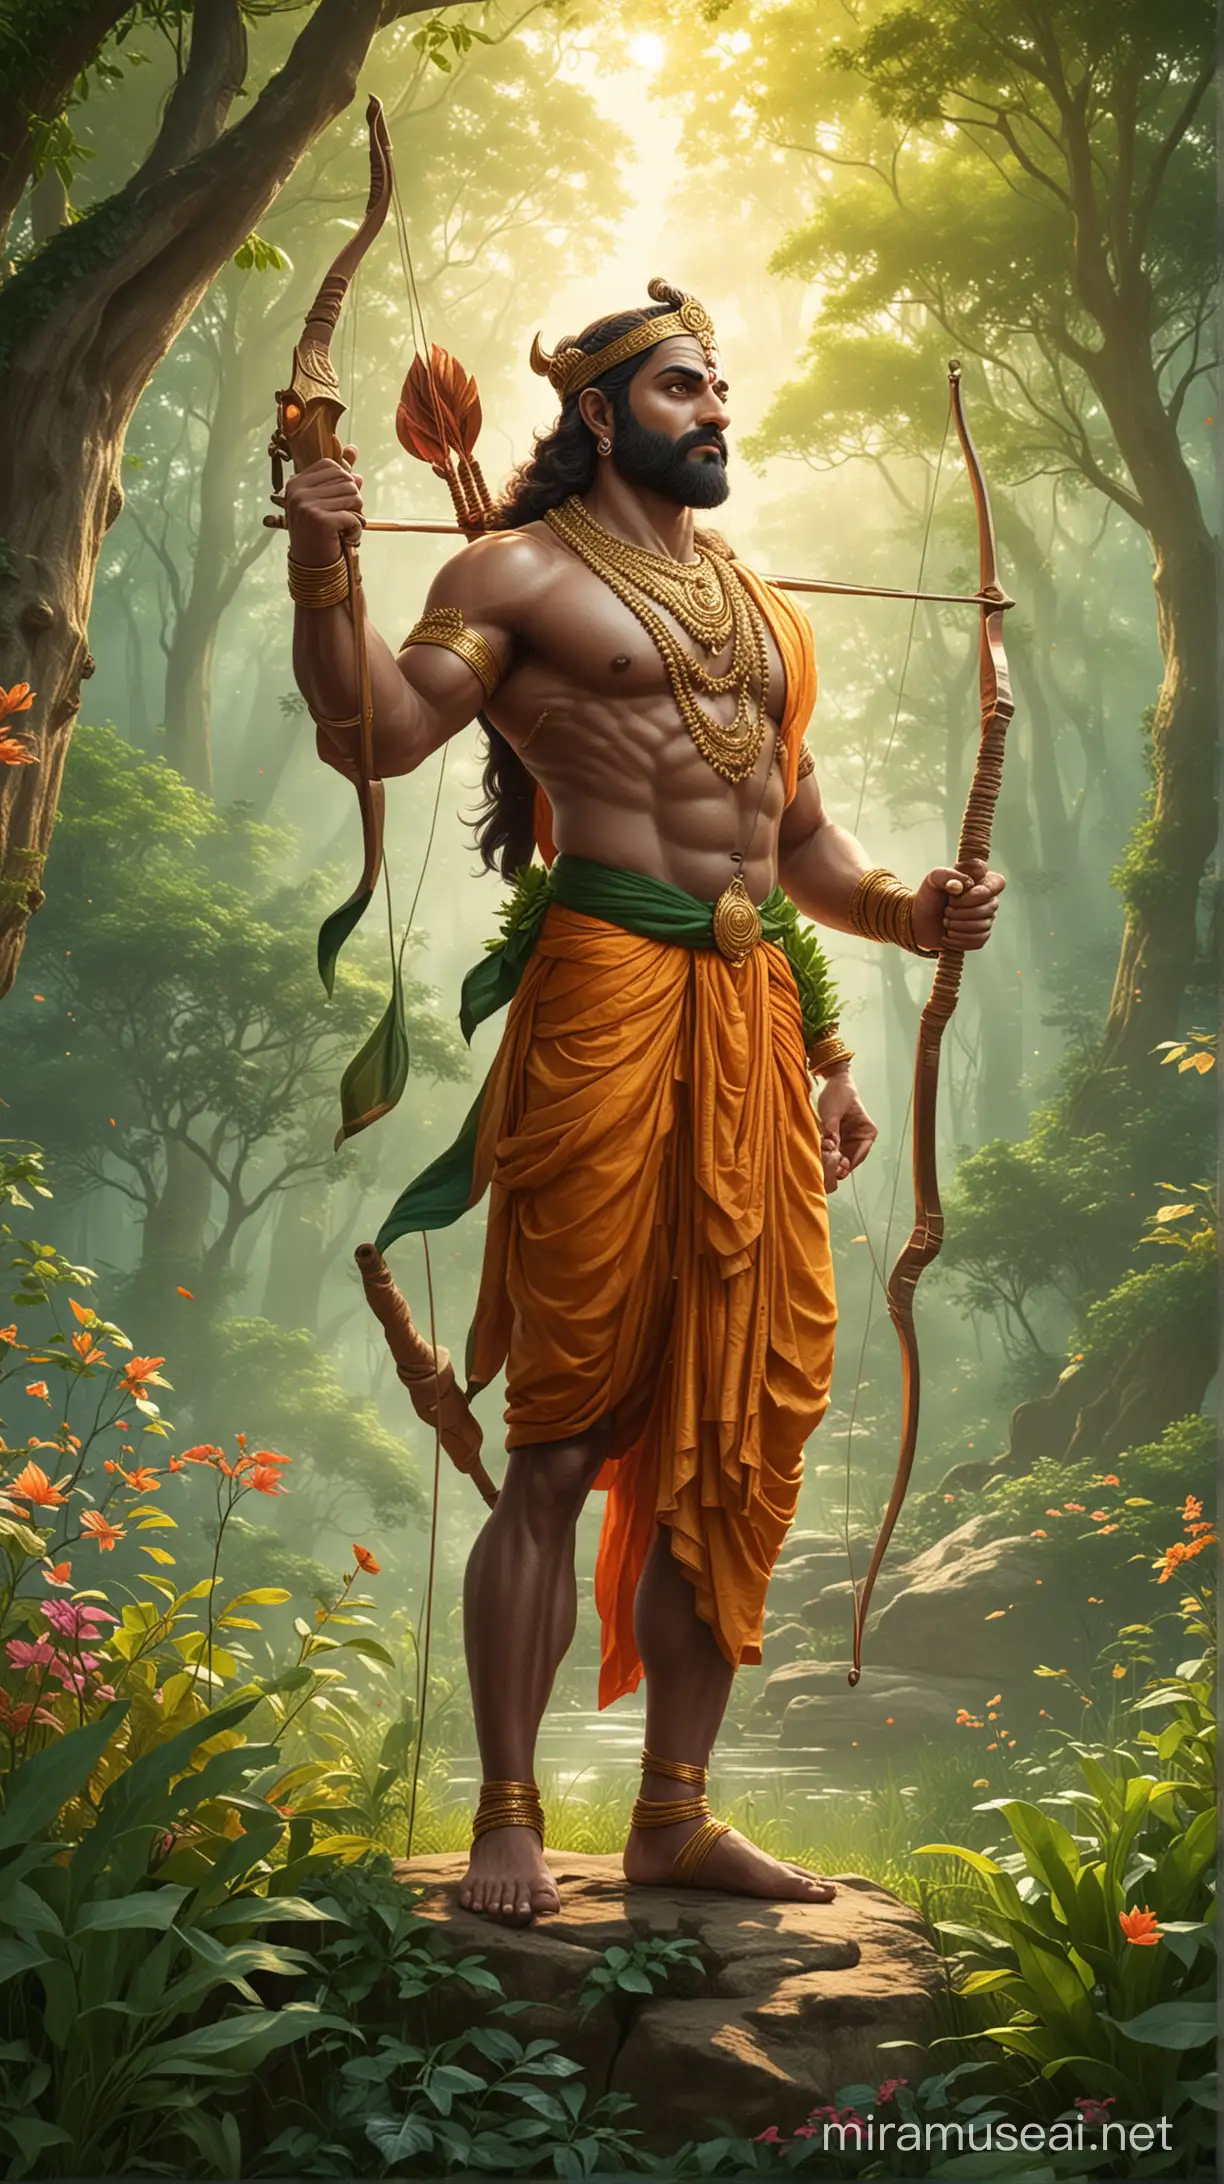 Divine Lord Ram in Serene Majesty amidst Lush Greenery and Divine Light